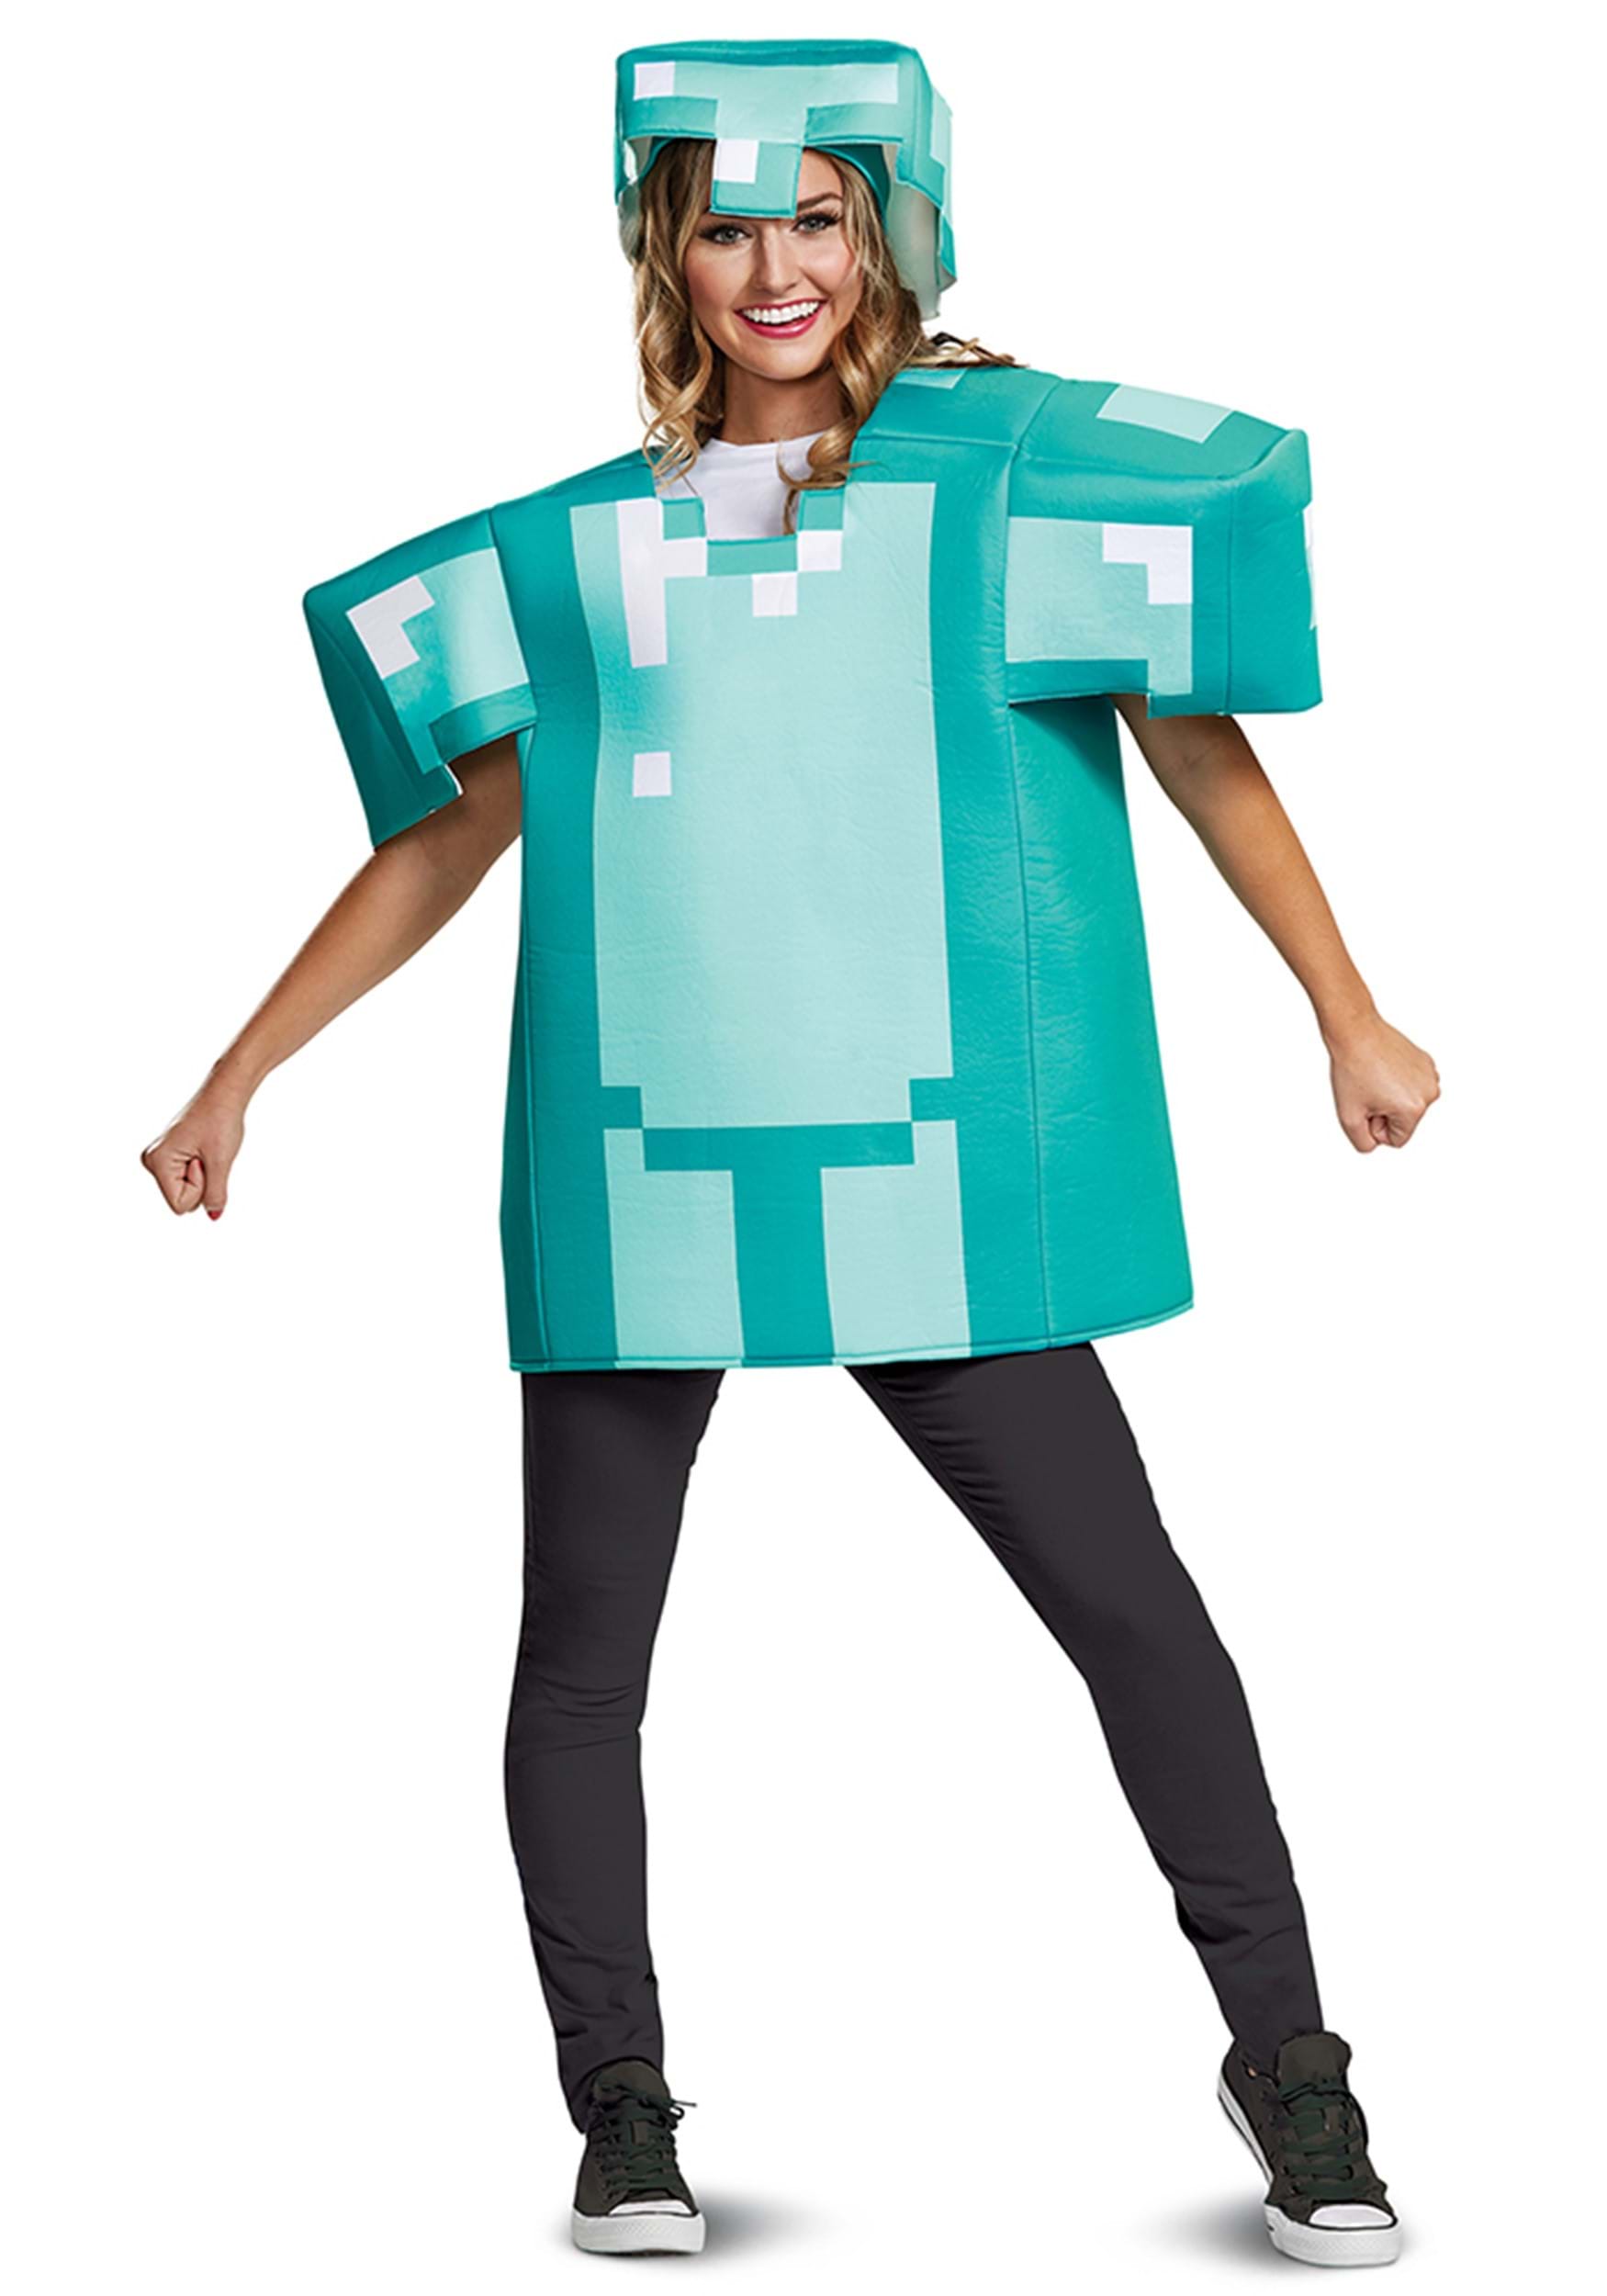 https://images.halloweencostumes.ca/products/73396/1-1/minecraft-armor-classic-adult-costume.jpg